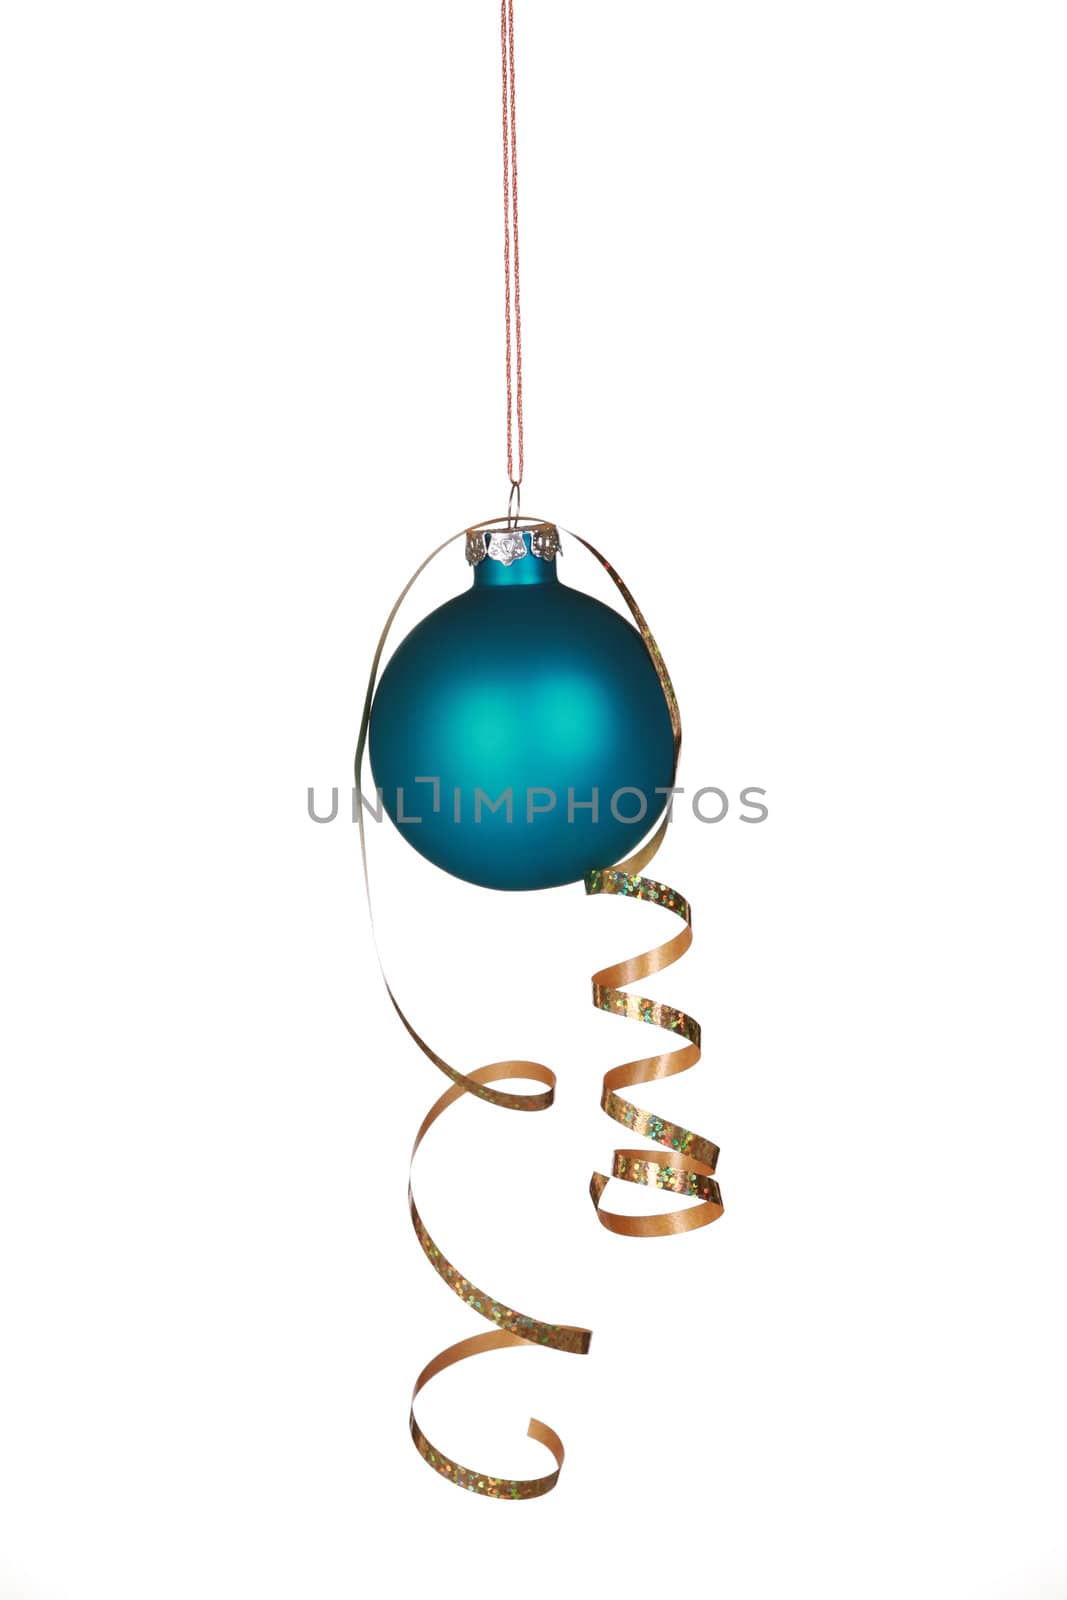 Beautiful blue ornament with ribbon  hanging in curls